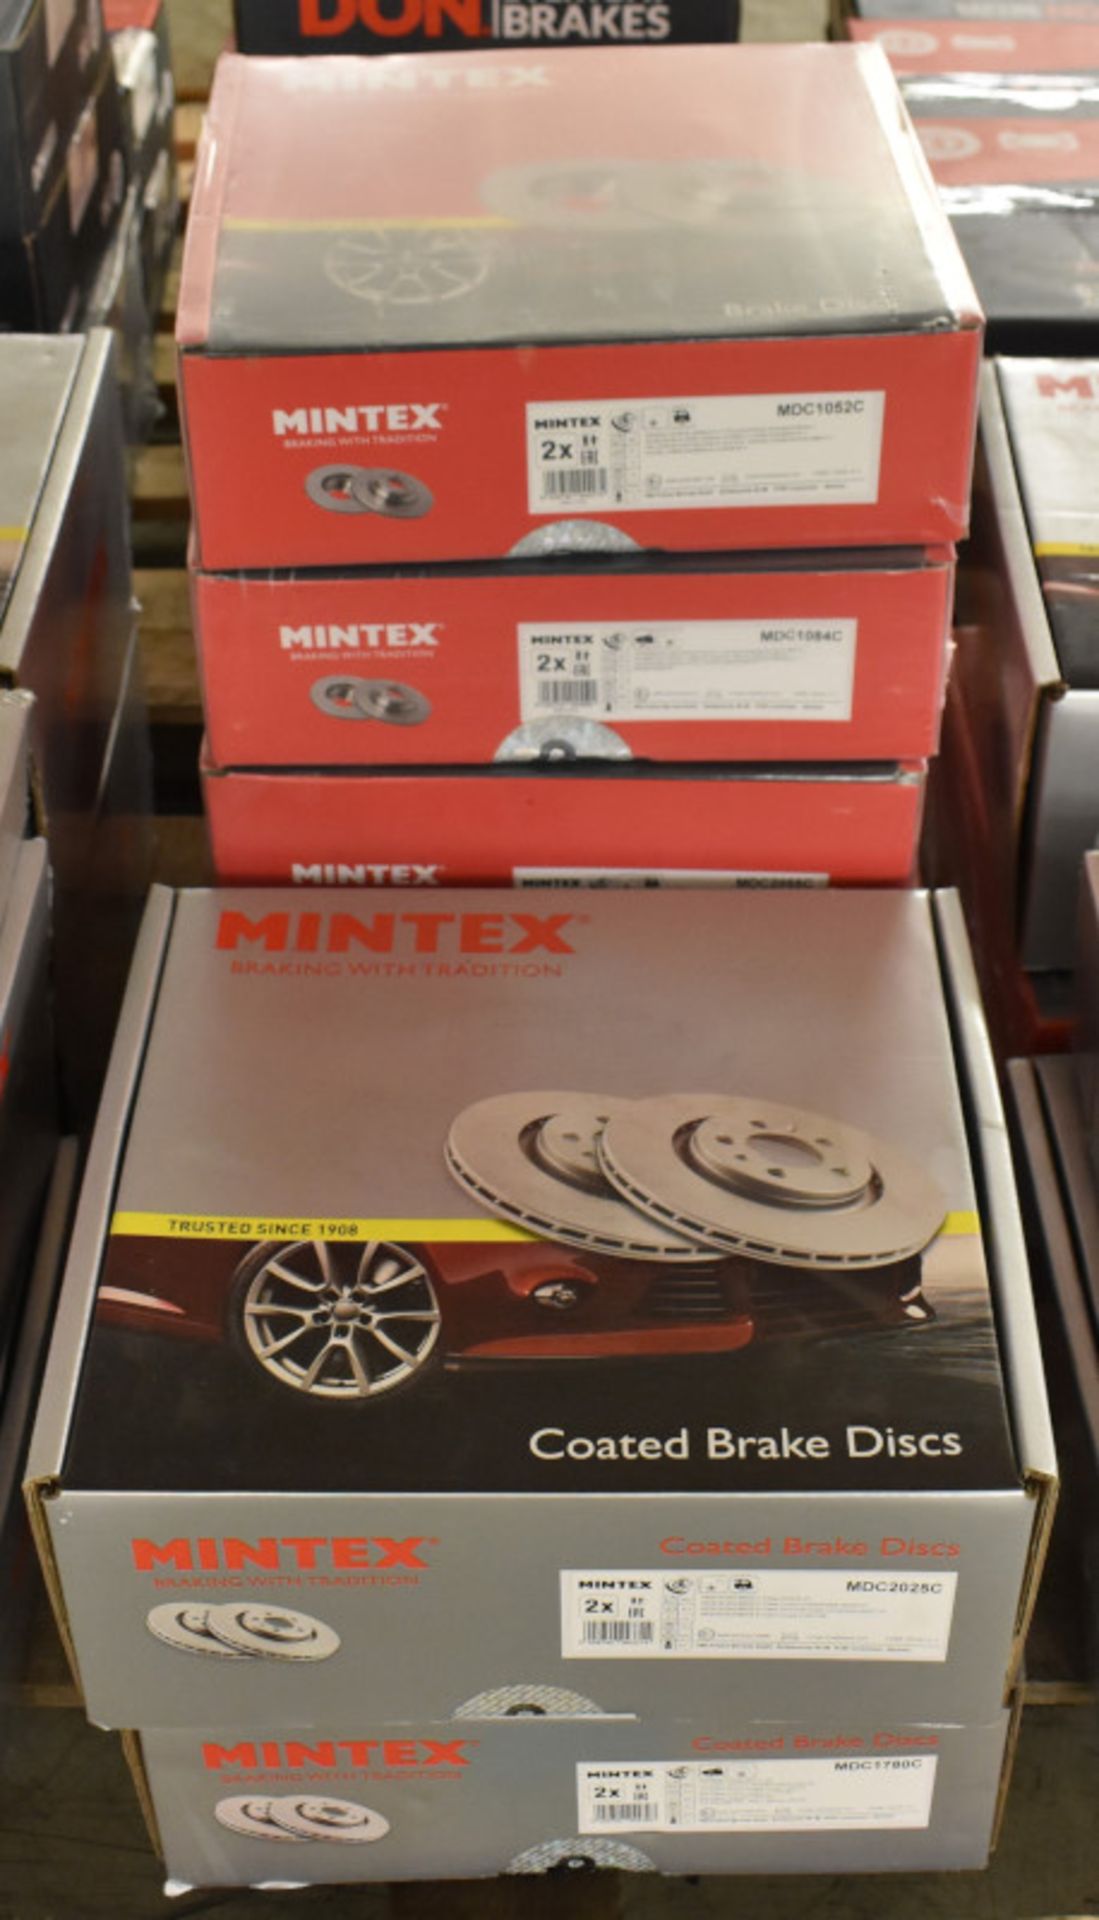 6x Mintex Brake Disc Sets (2x Coated) - please see pictures for examples of make and model